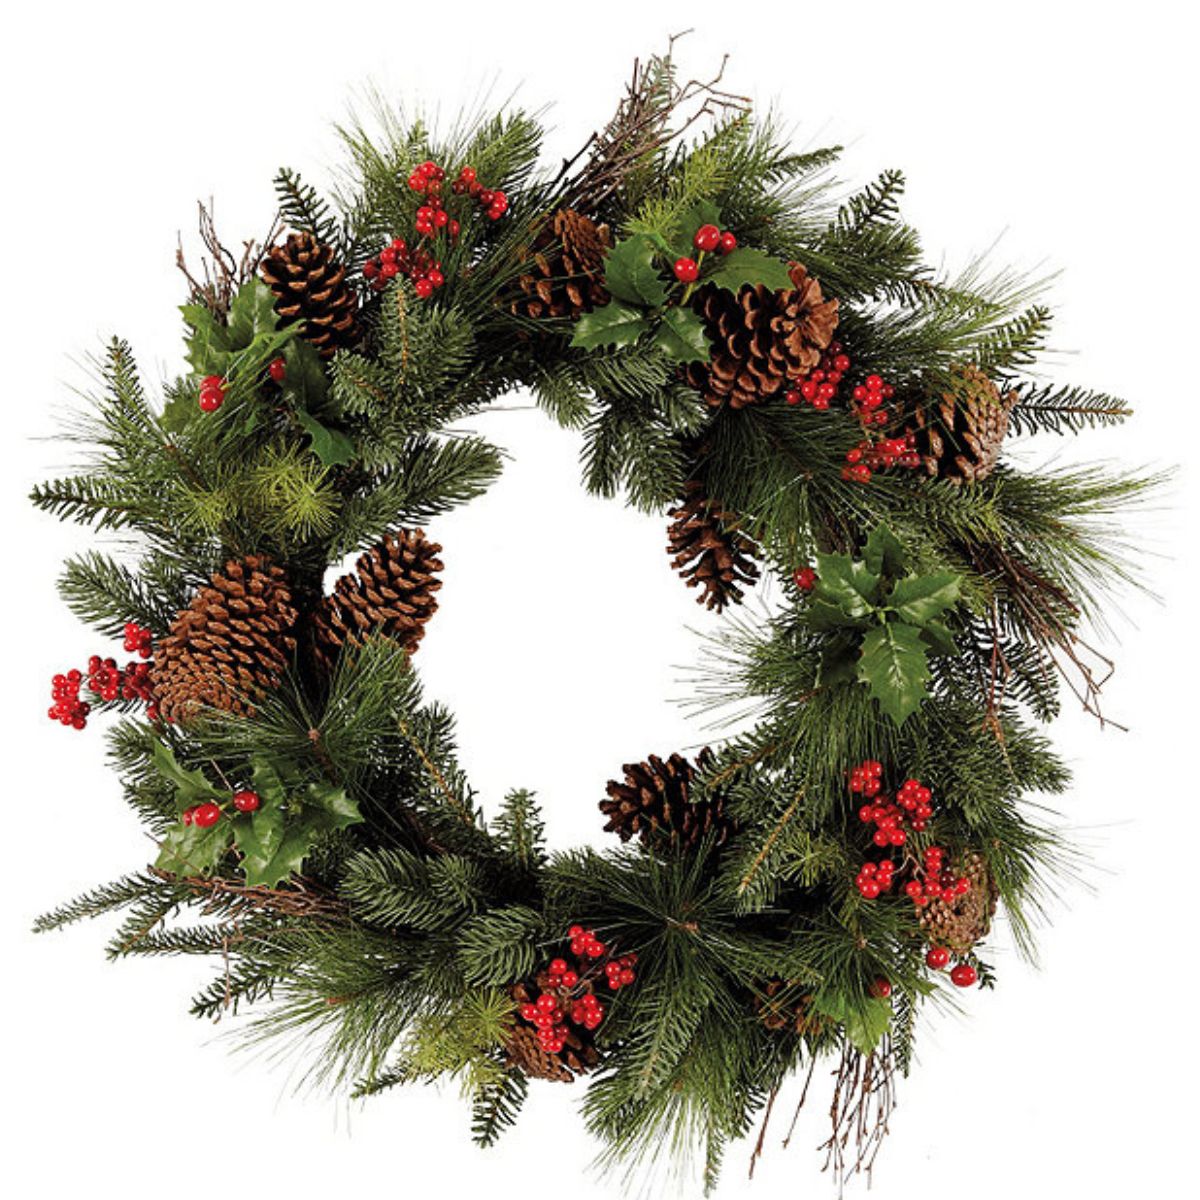 mixed pine and berry wreath from ballard designs